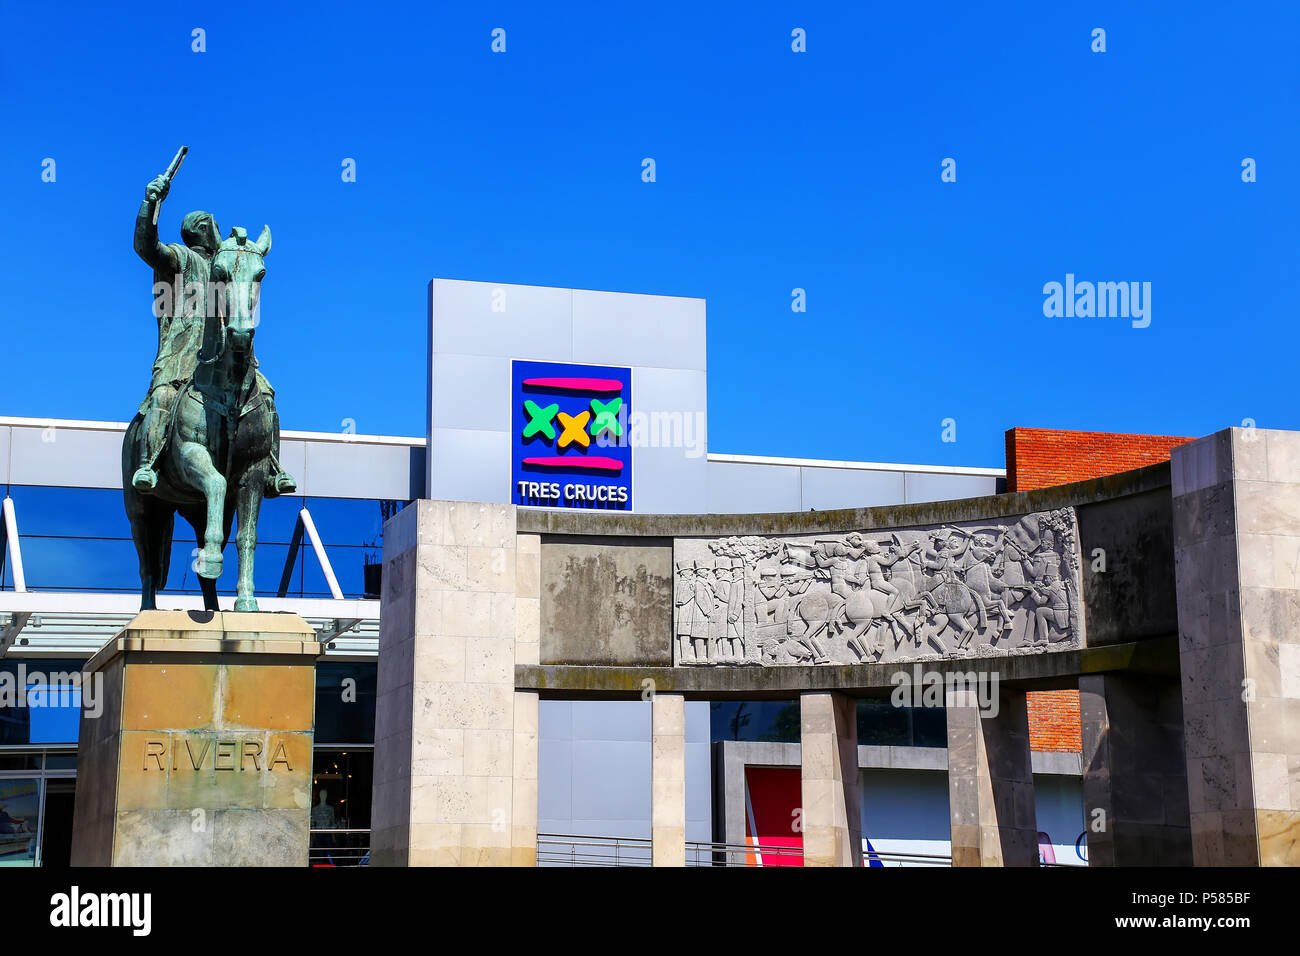 Tres Cruces bus terminal and statue of Fructuoso Rivera in Montevideo, Uruguay. Montevideo is the capital and largest city of Uruguay. Stock Photo